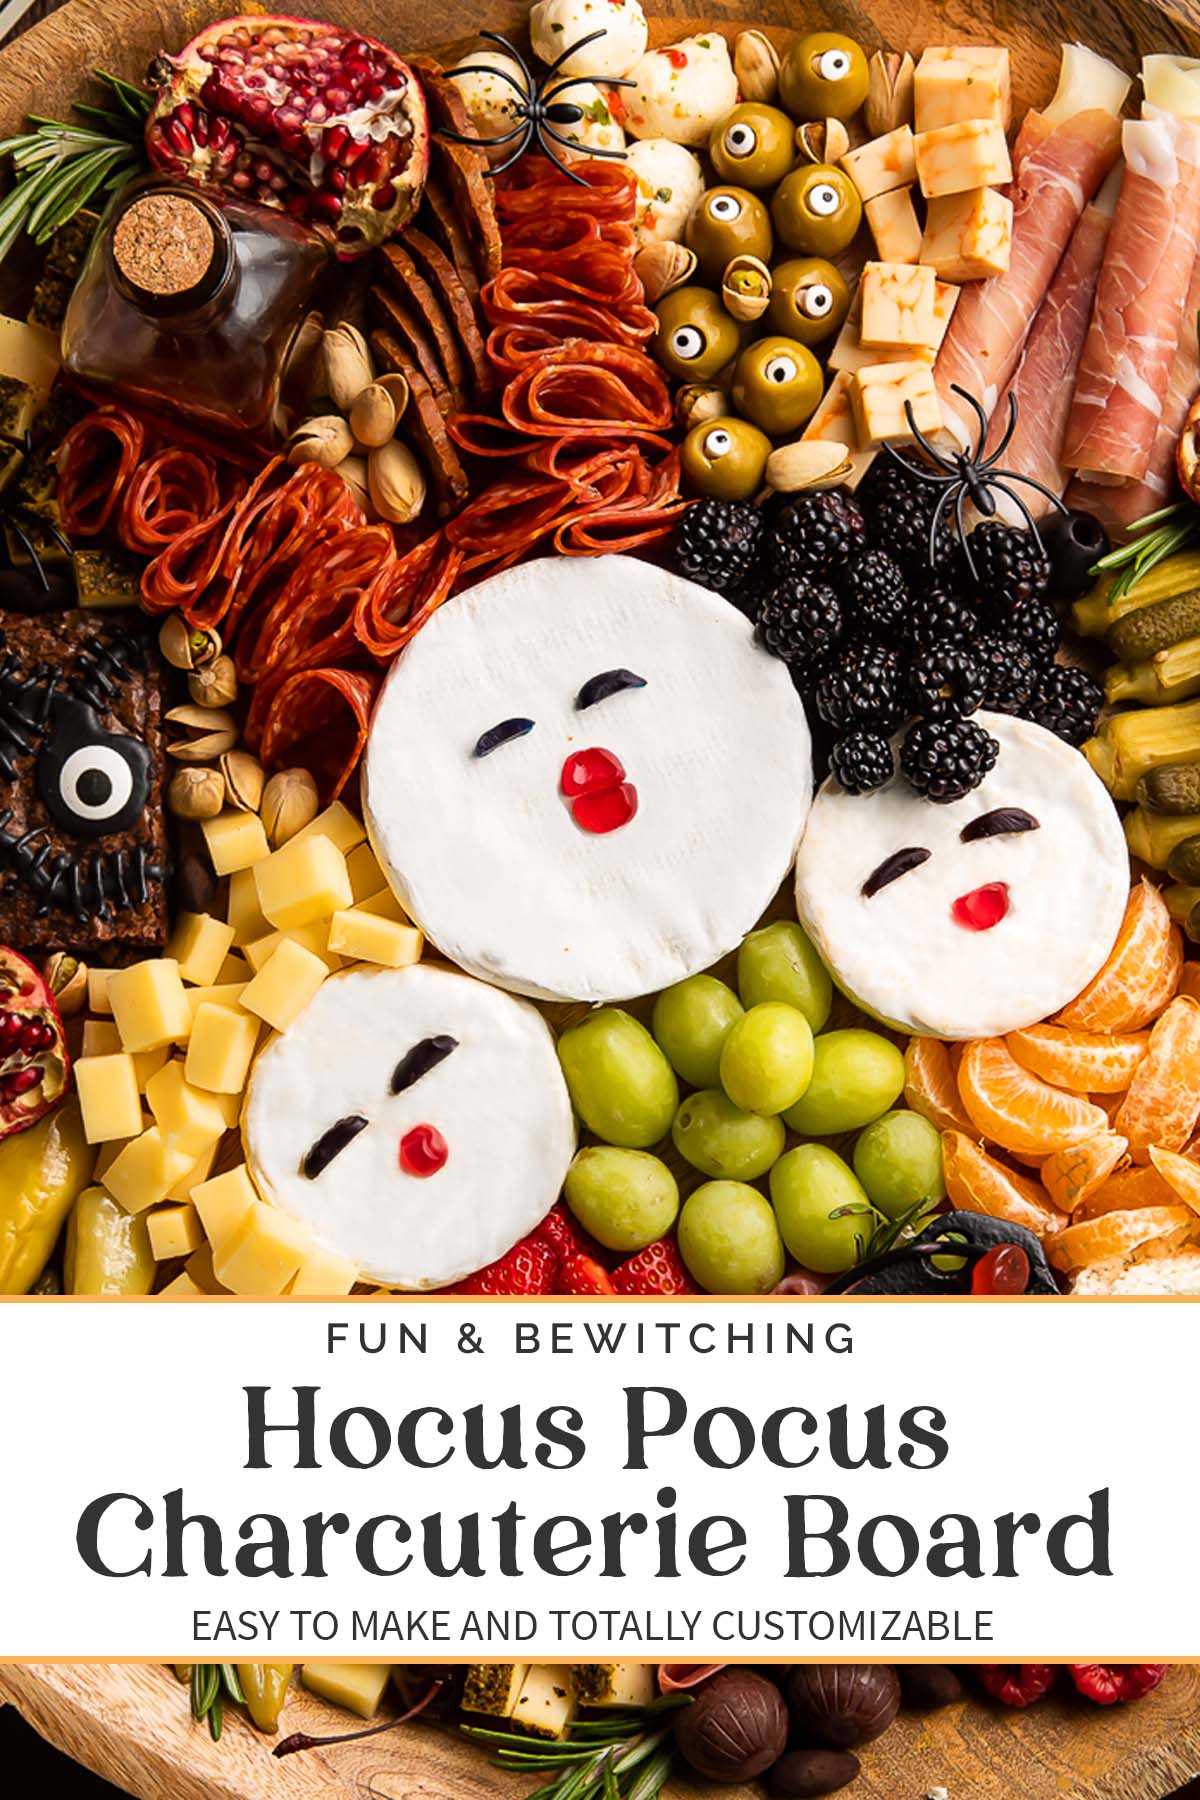 Pin graphic for Hocus Pocus charcuterie board.